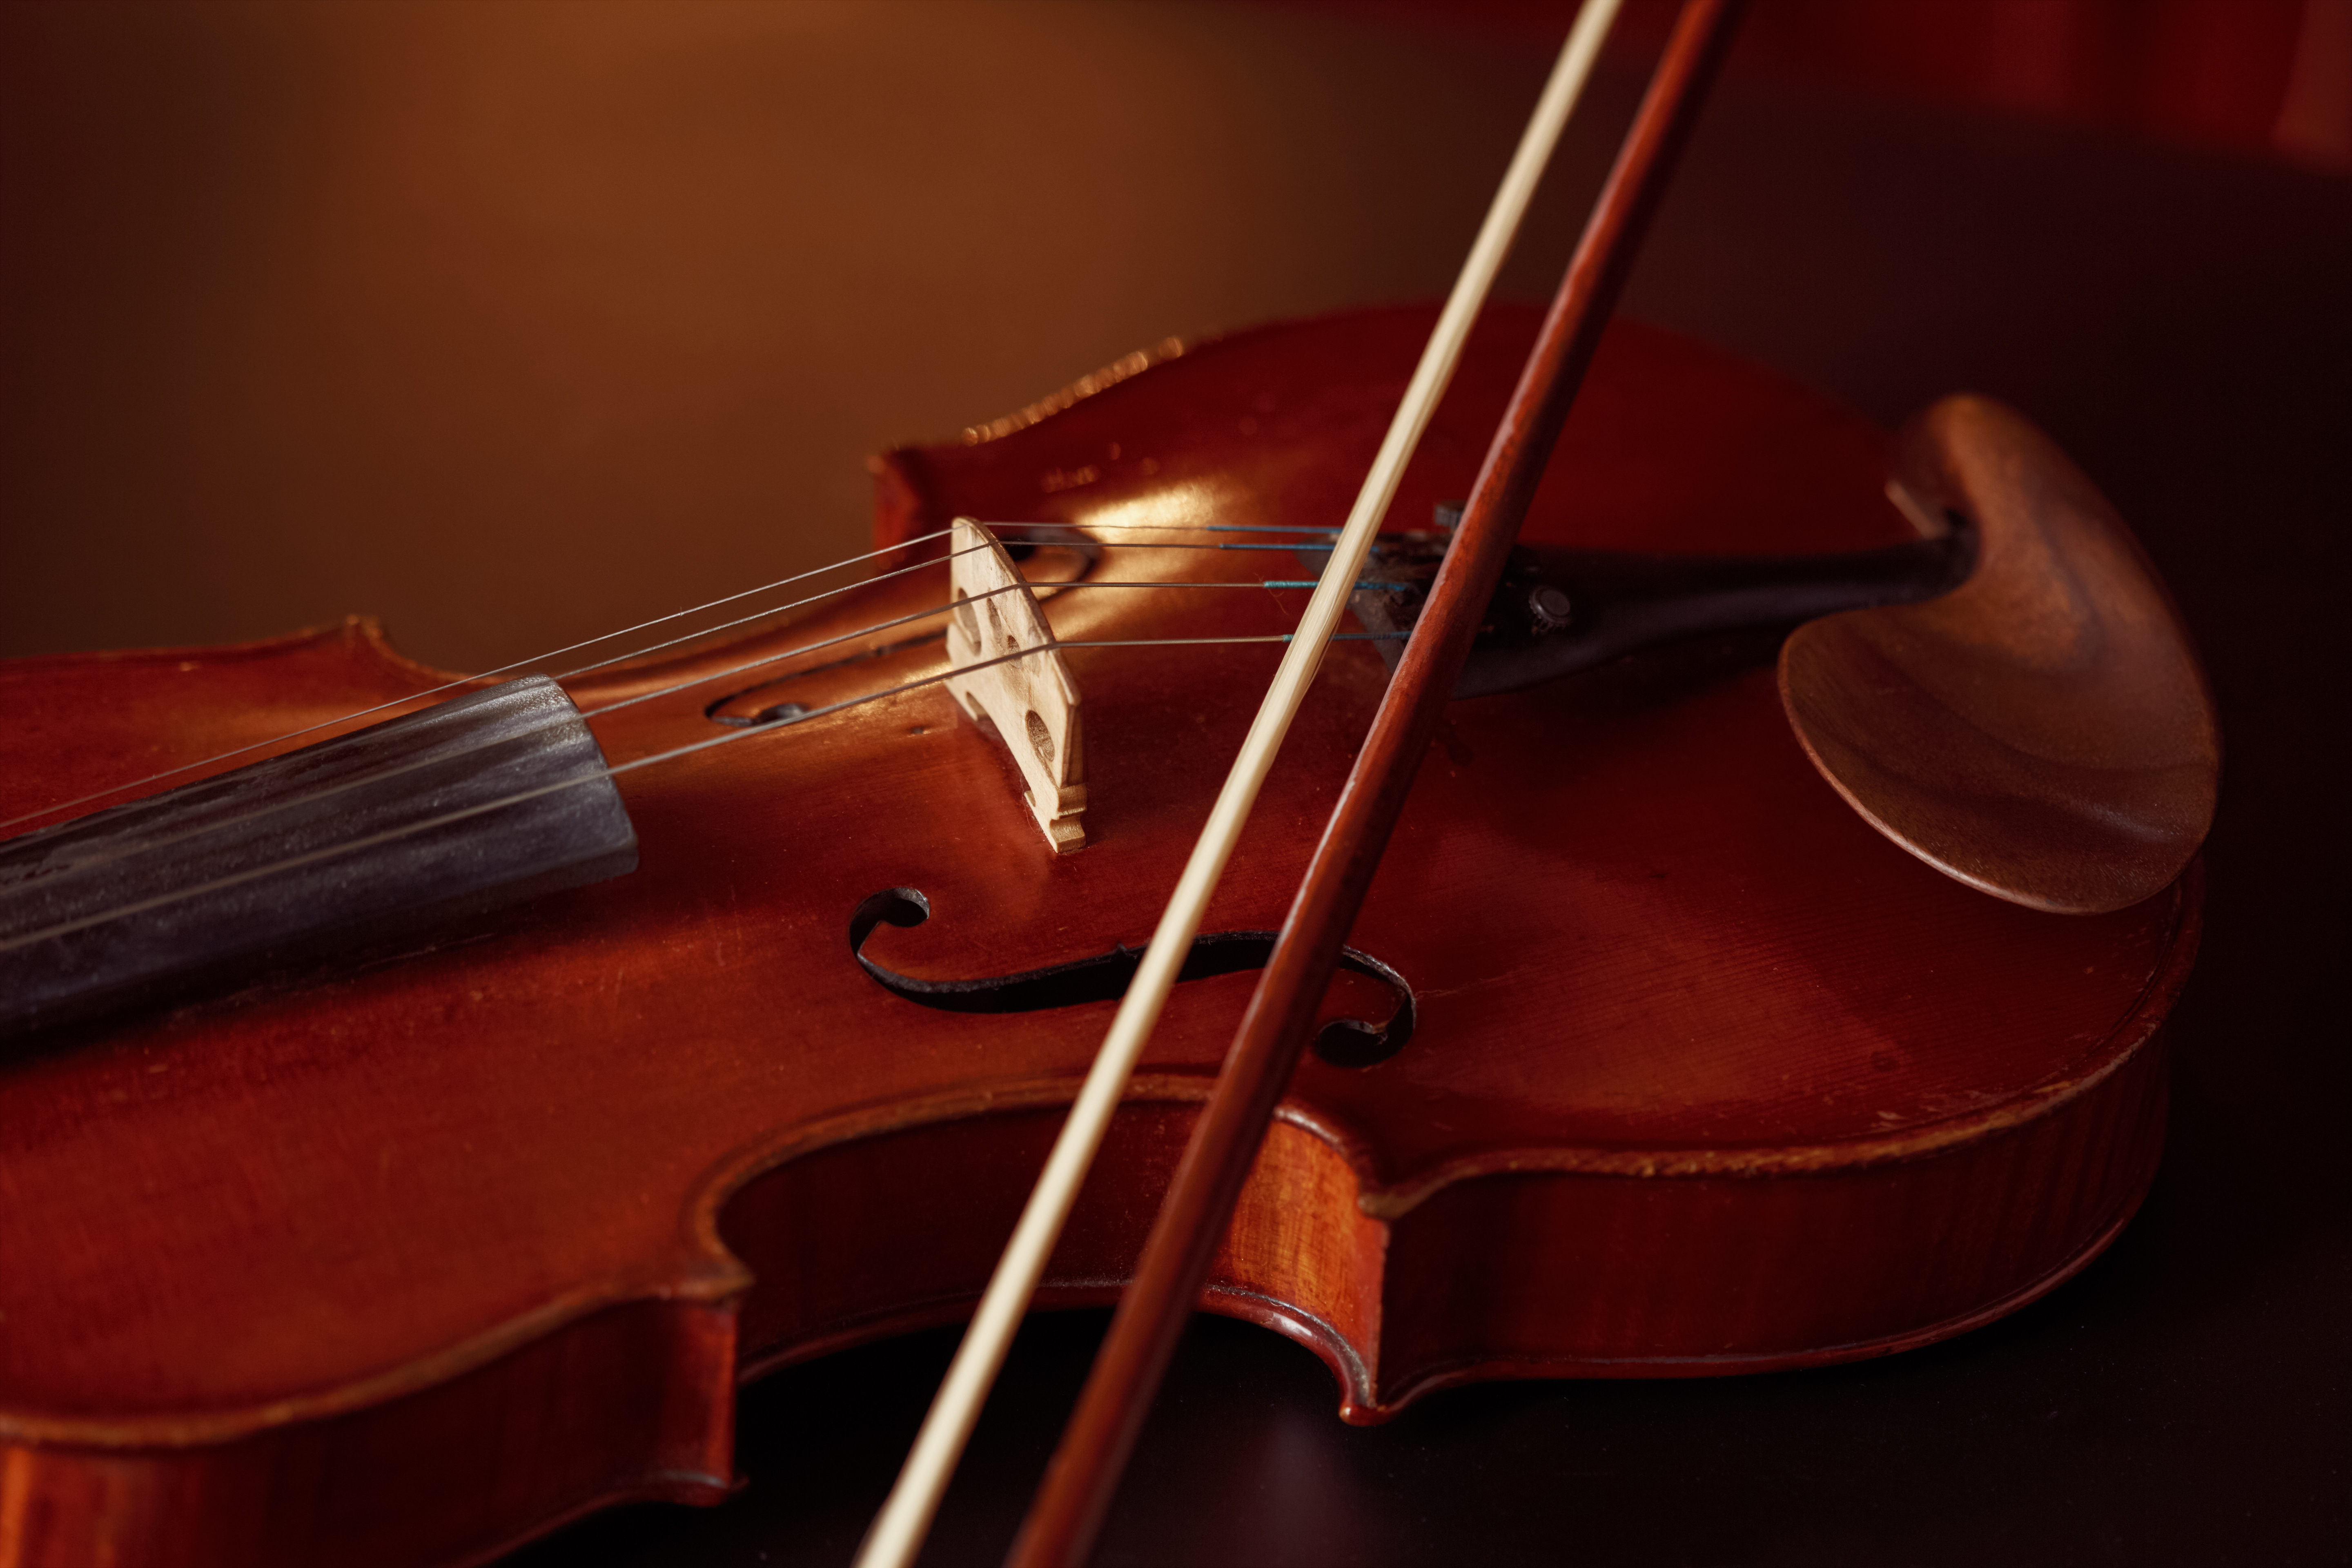 How to Find the Best Viola Strings: My 3 Personal Favorites